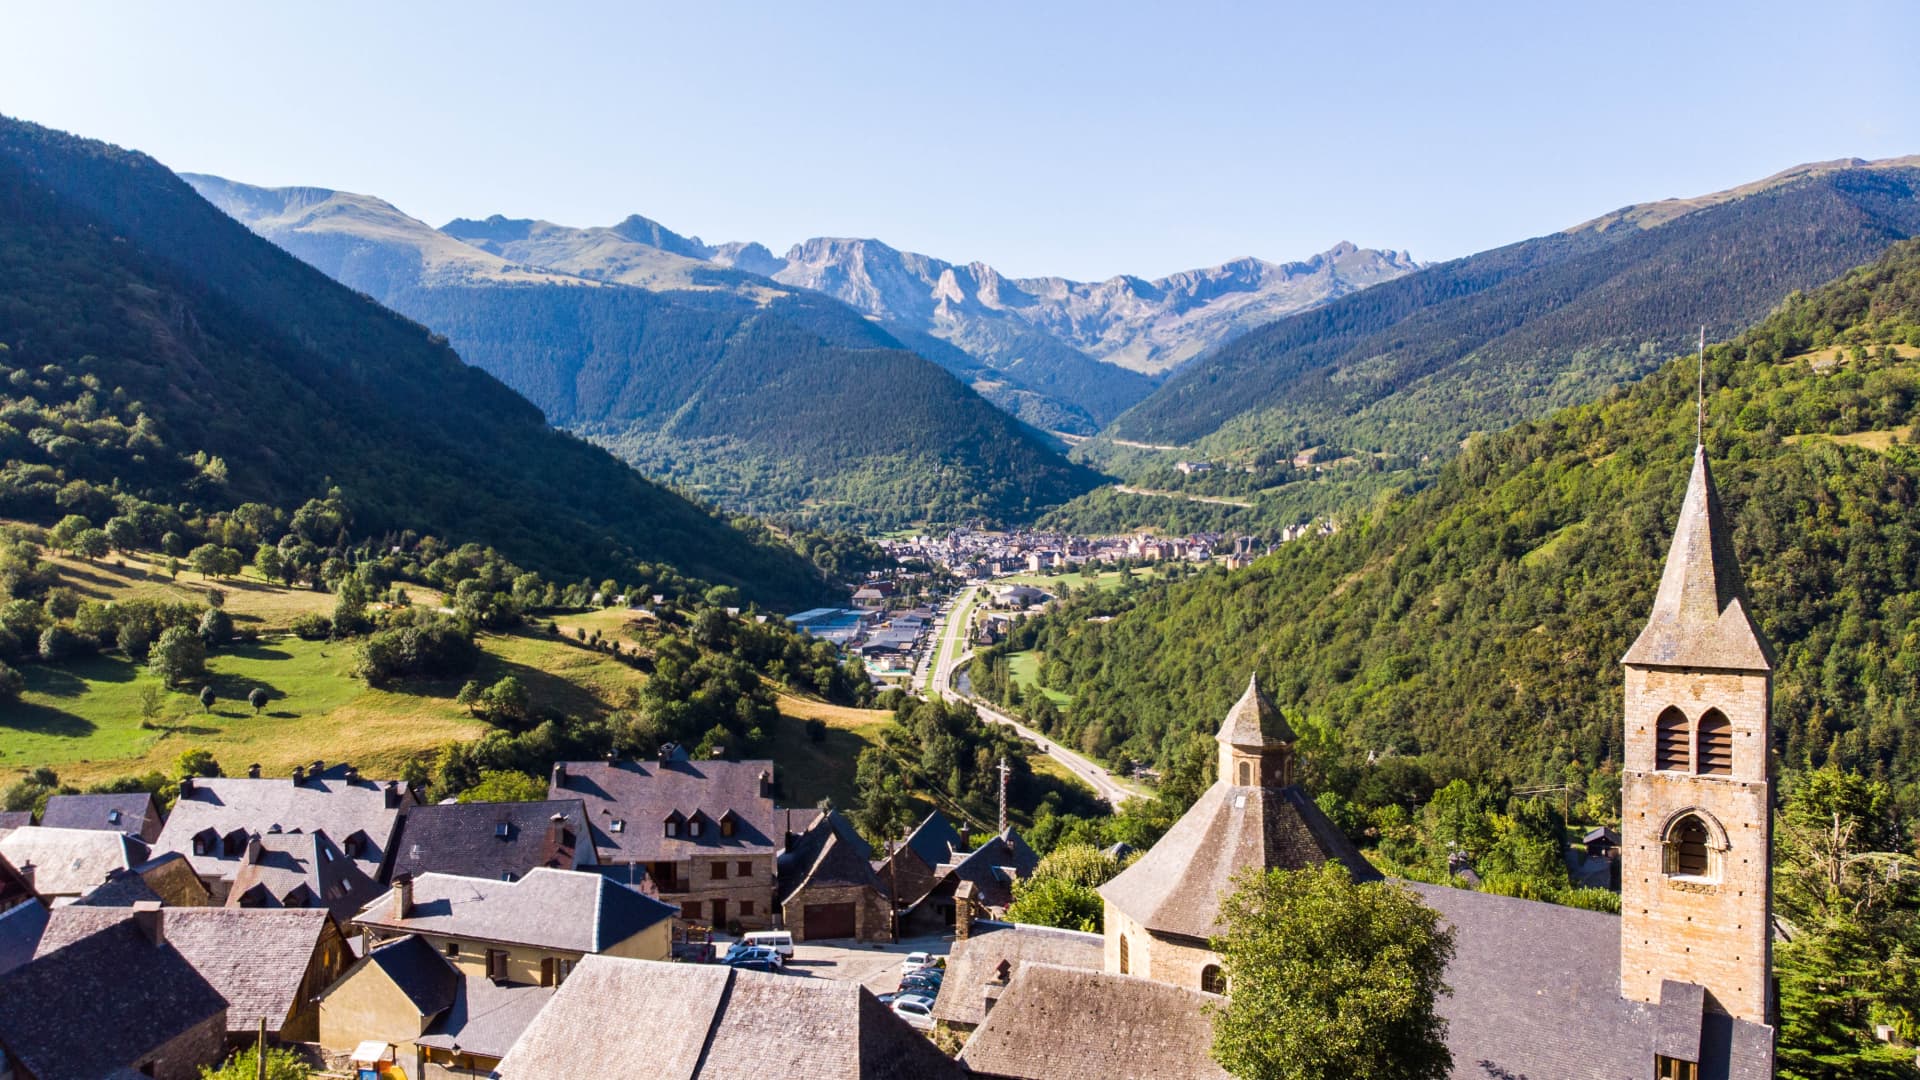 The Val d'Aran in the Pyrenees mountains, a range that runs along the French-Spanish border.